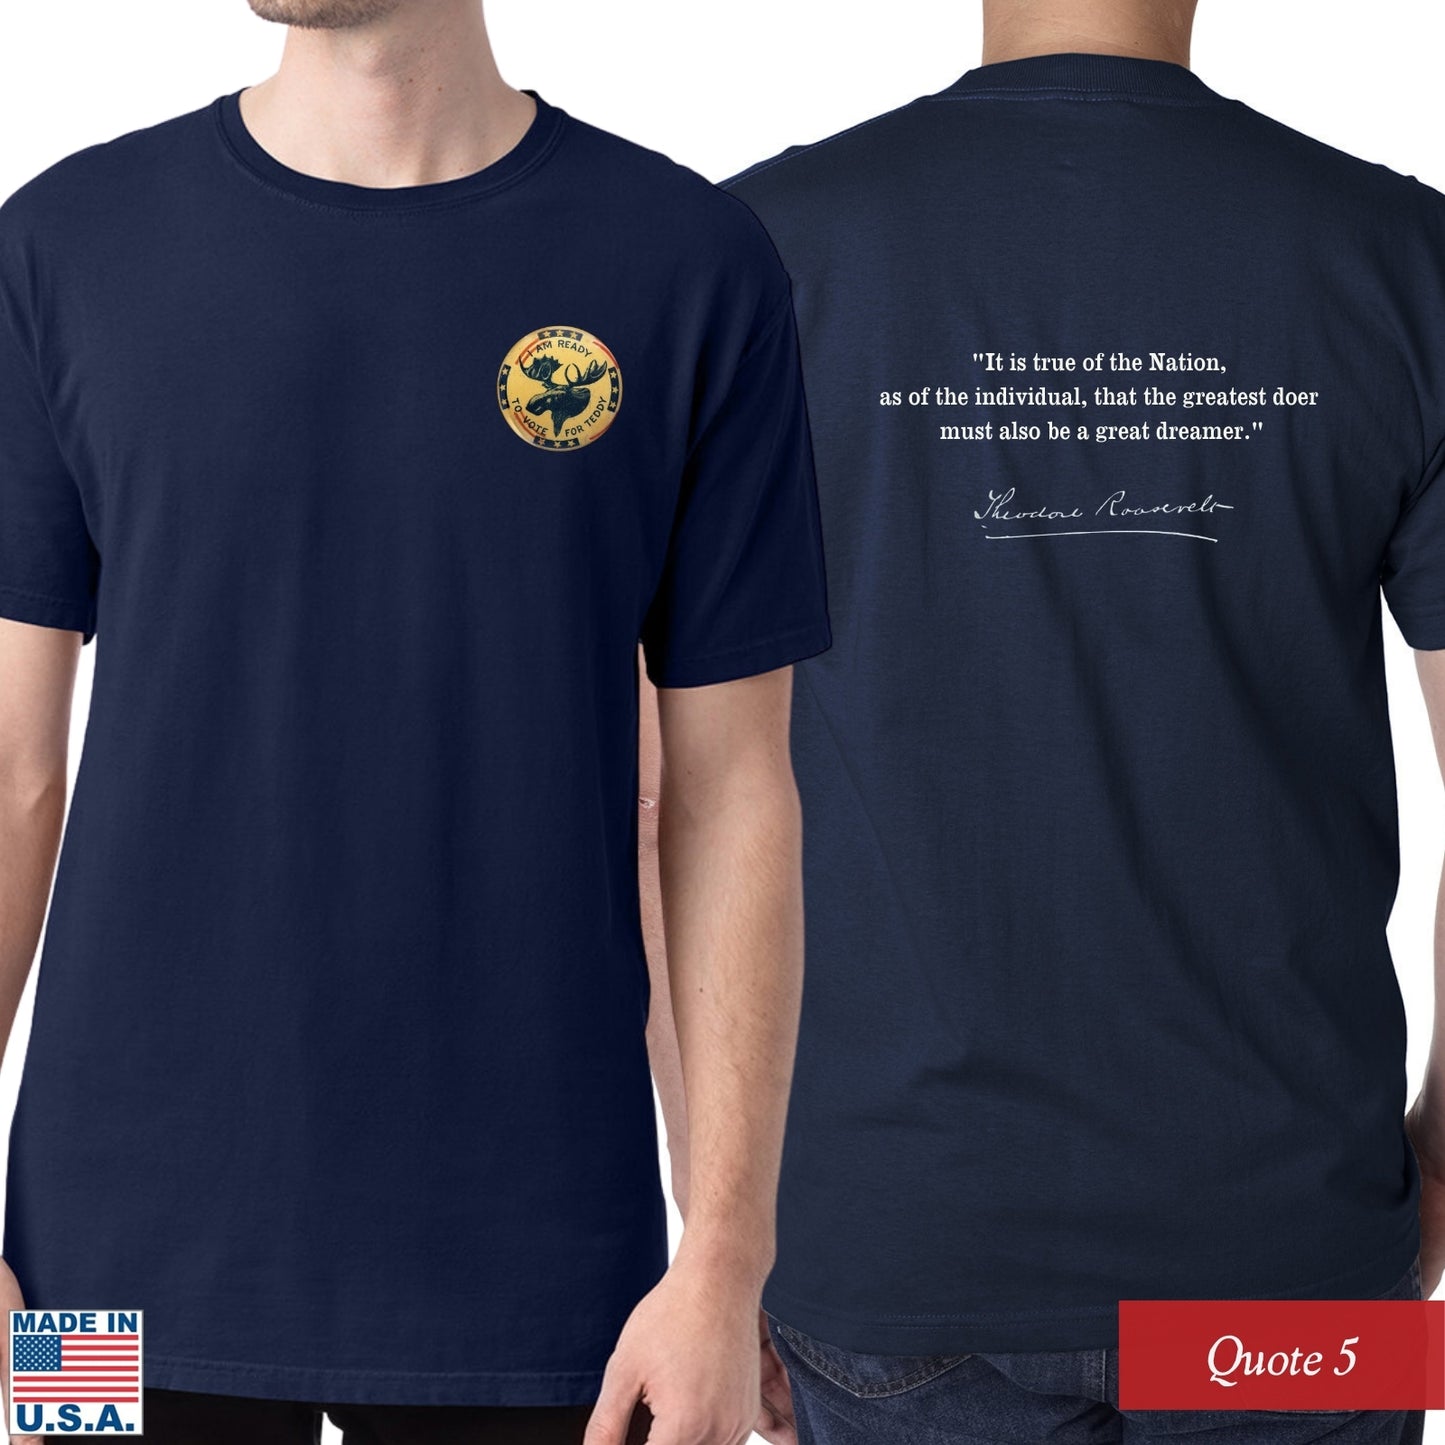 Quote 5 of the Teddy Roosevelt “I’m ready to vote for Teddy” presidential campaign shirt — Made in America from The History List store